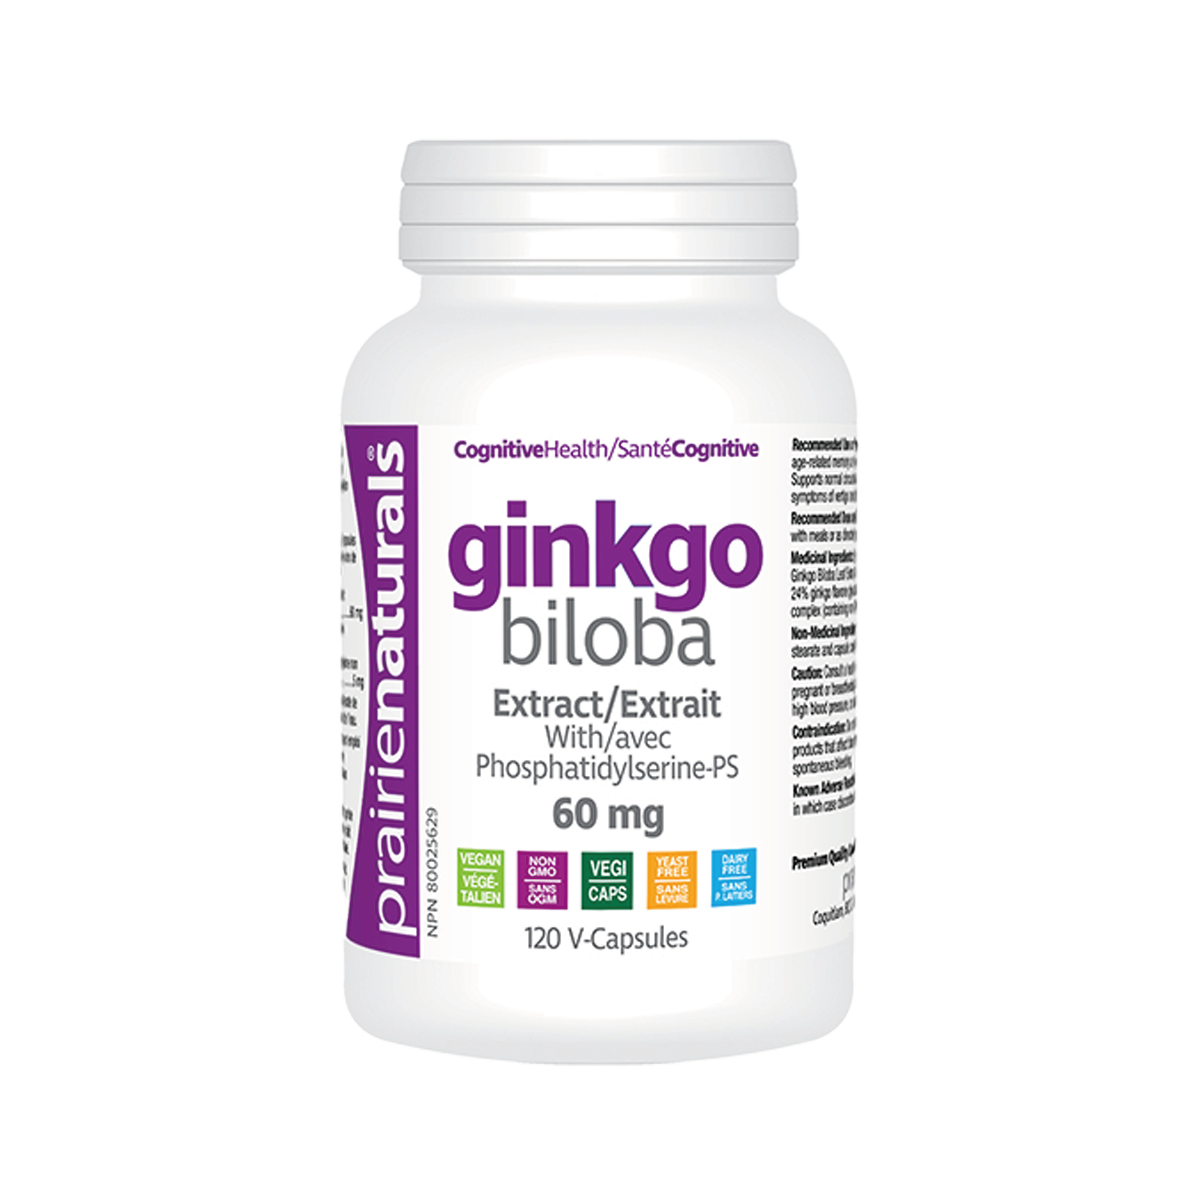 Prairie Naturals Ginkgo Biloba Extract 120 Capsules - Improves memory, supports healthy brain function, improves cognitive function, improves circulation and blood vessel strength, and neuroprotective properties